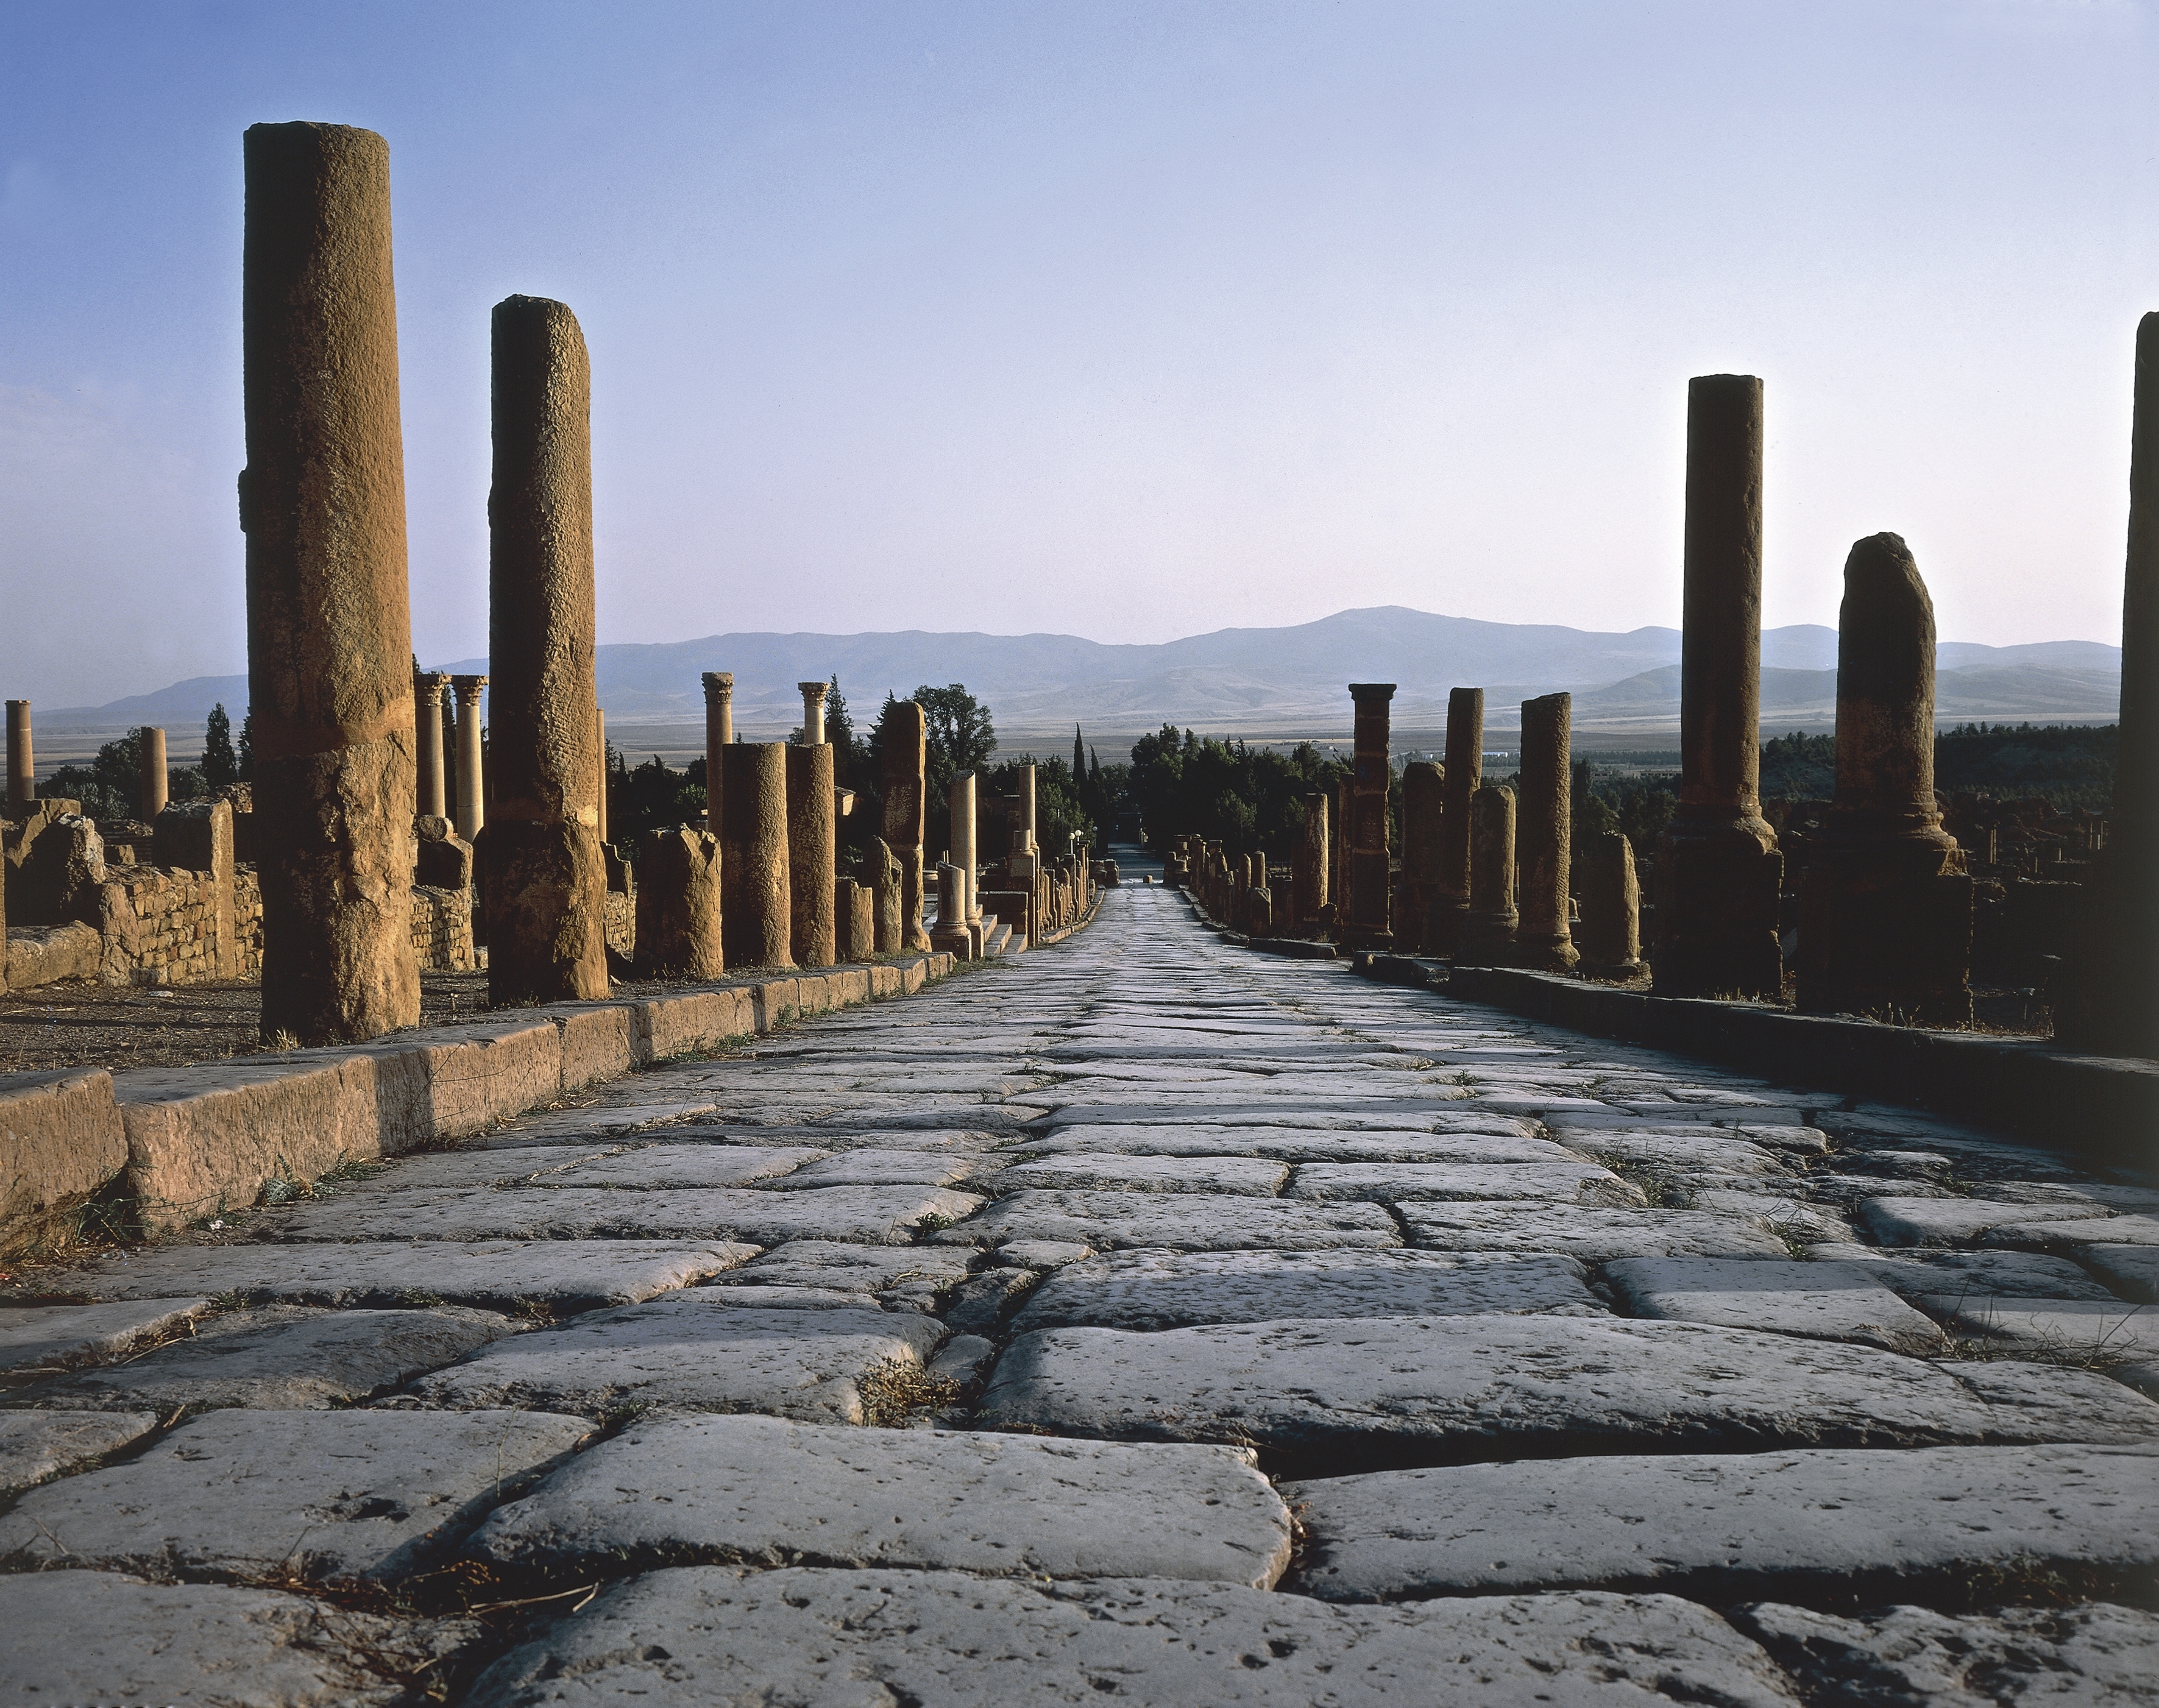 Algeria, timgad, Ruins of Roman colonial town founded by Emperor Trajan around 100 A.D.